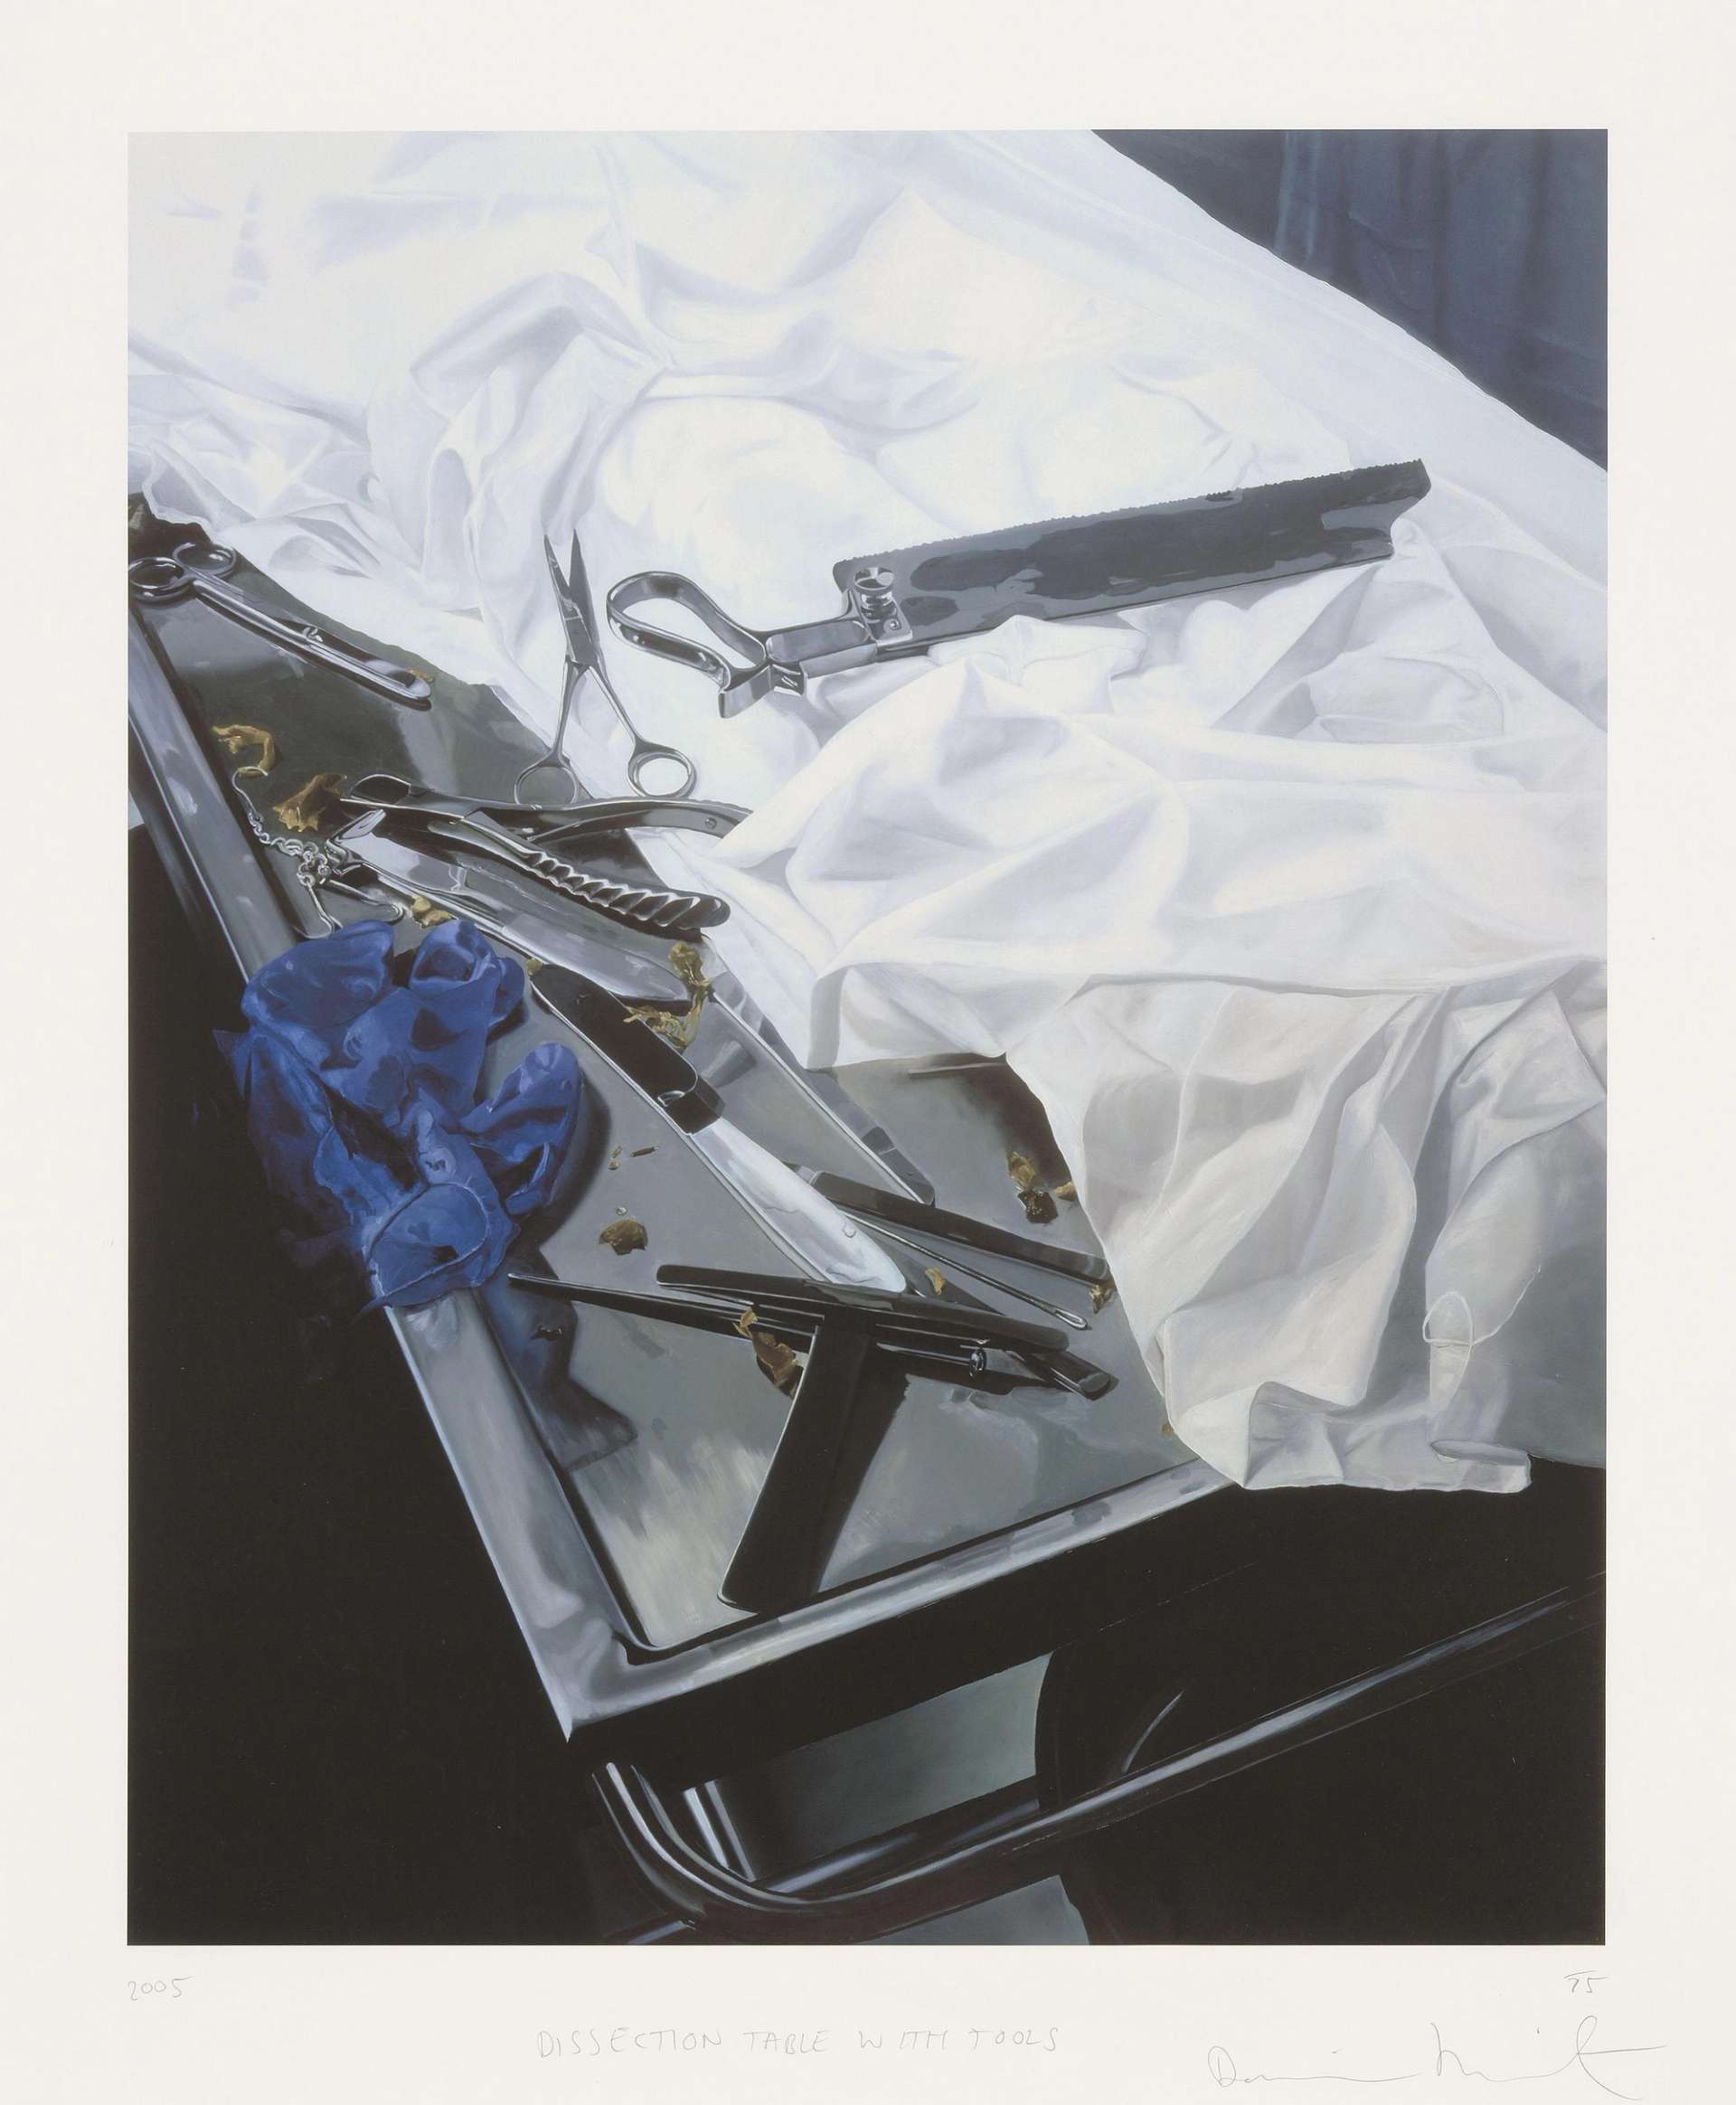 A realistic painting by Damien Hirst showing a dissection table covered in tools and a white sheet.